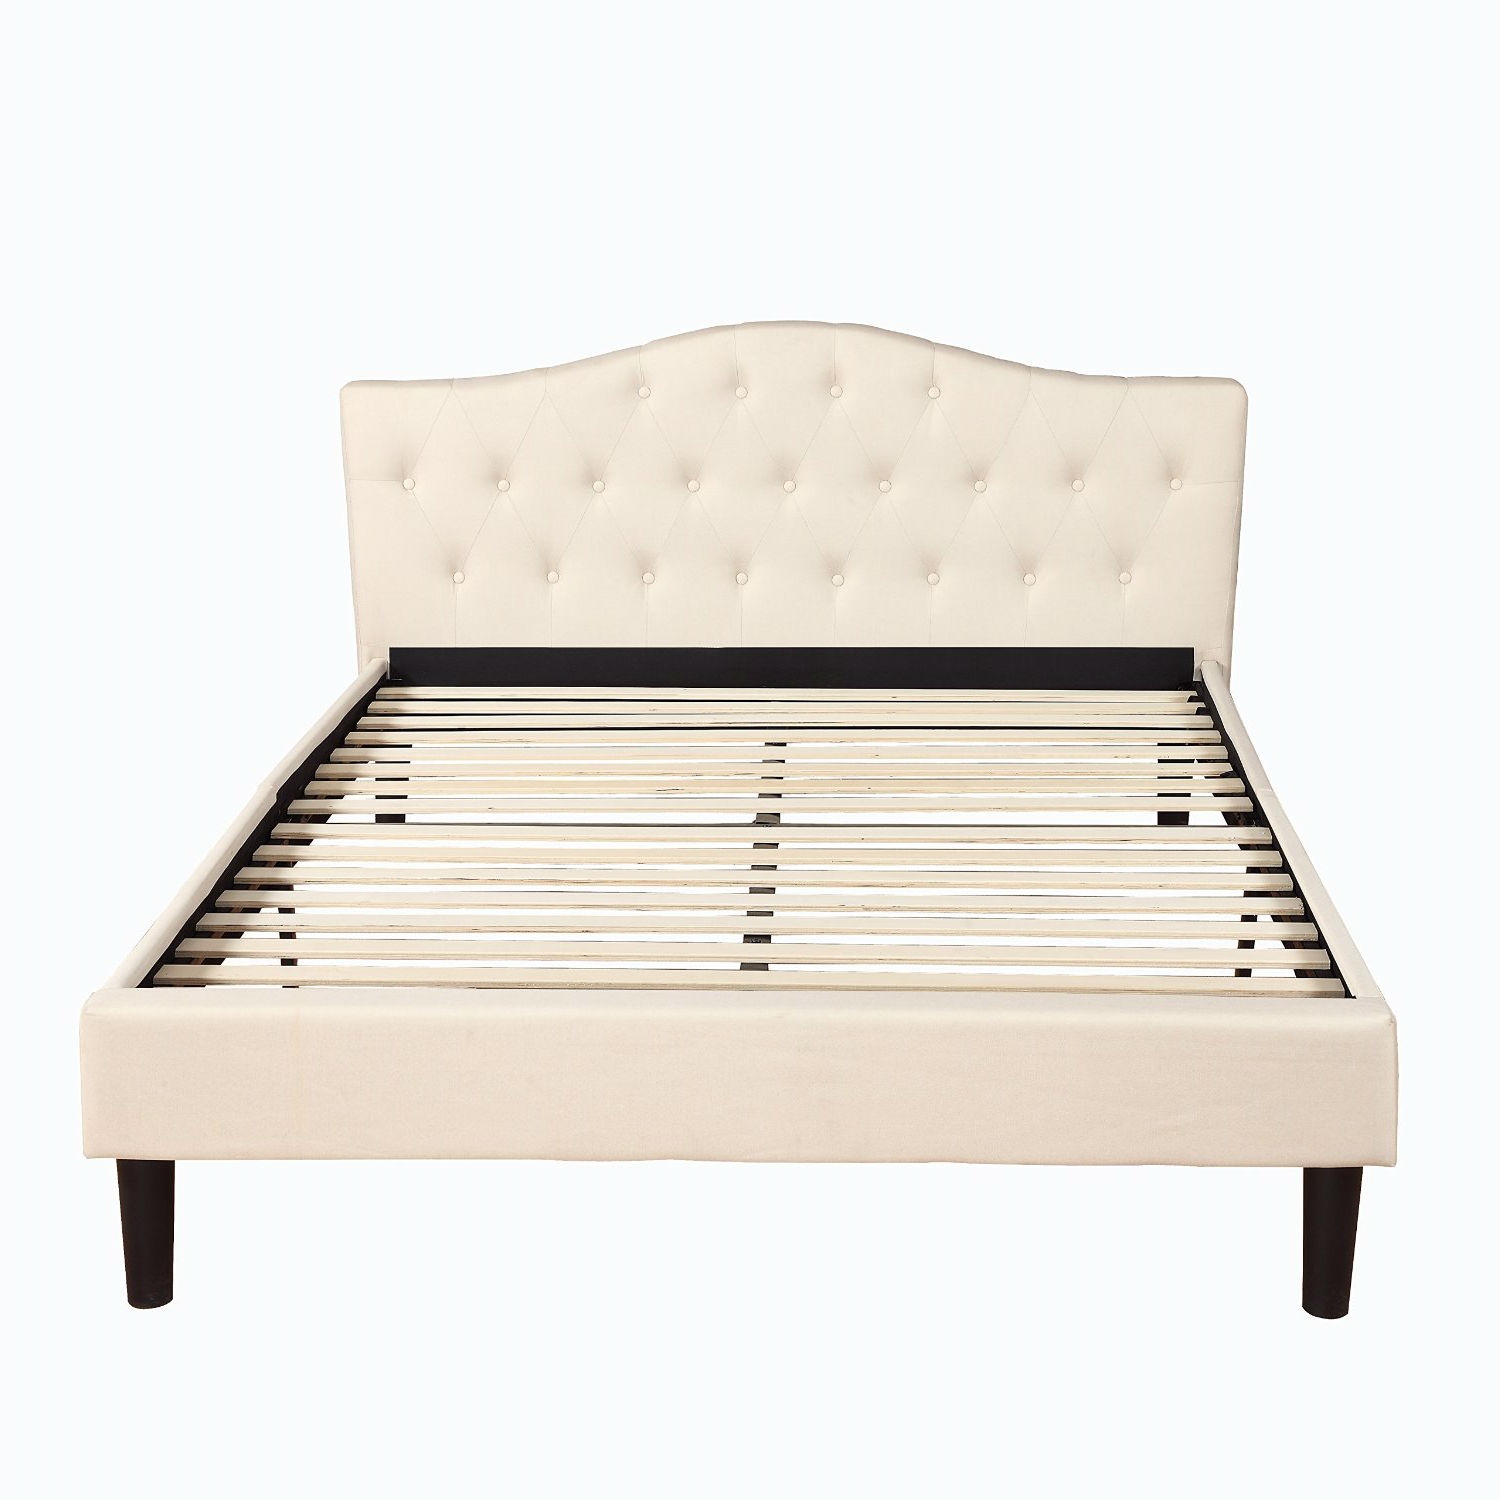 Queen size Ivory Linen Upholstered Platform Bed with Button-Tufted Headboard